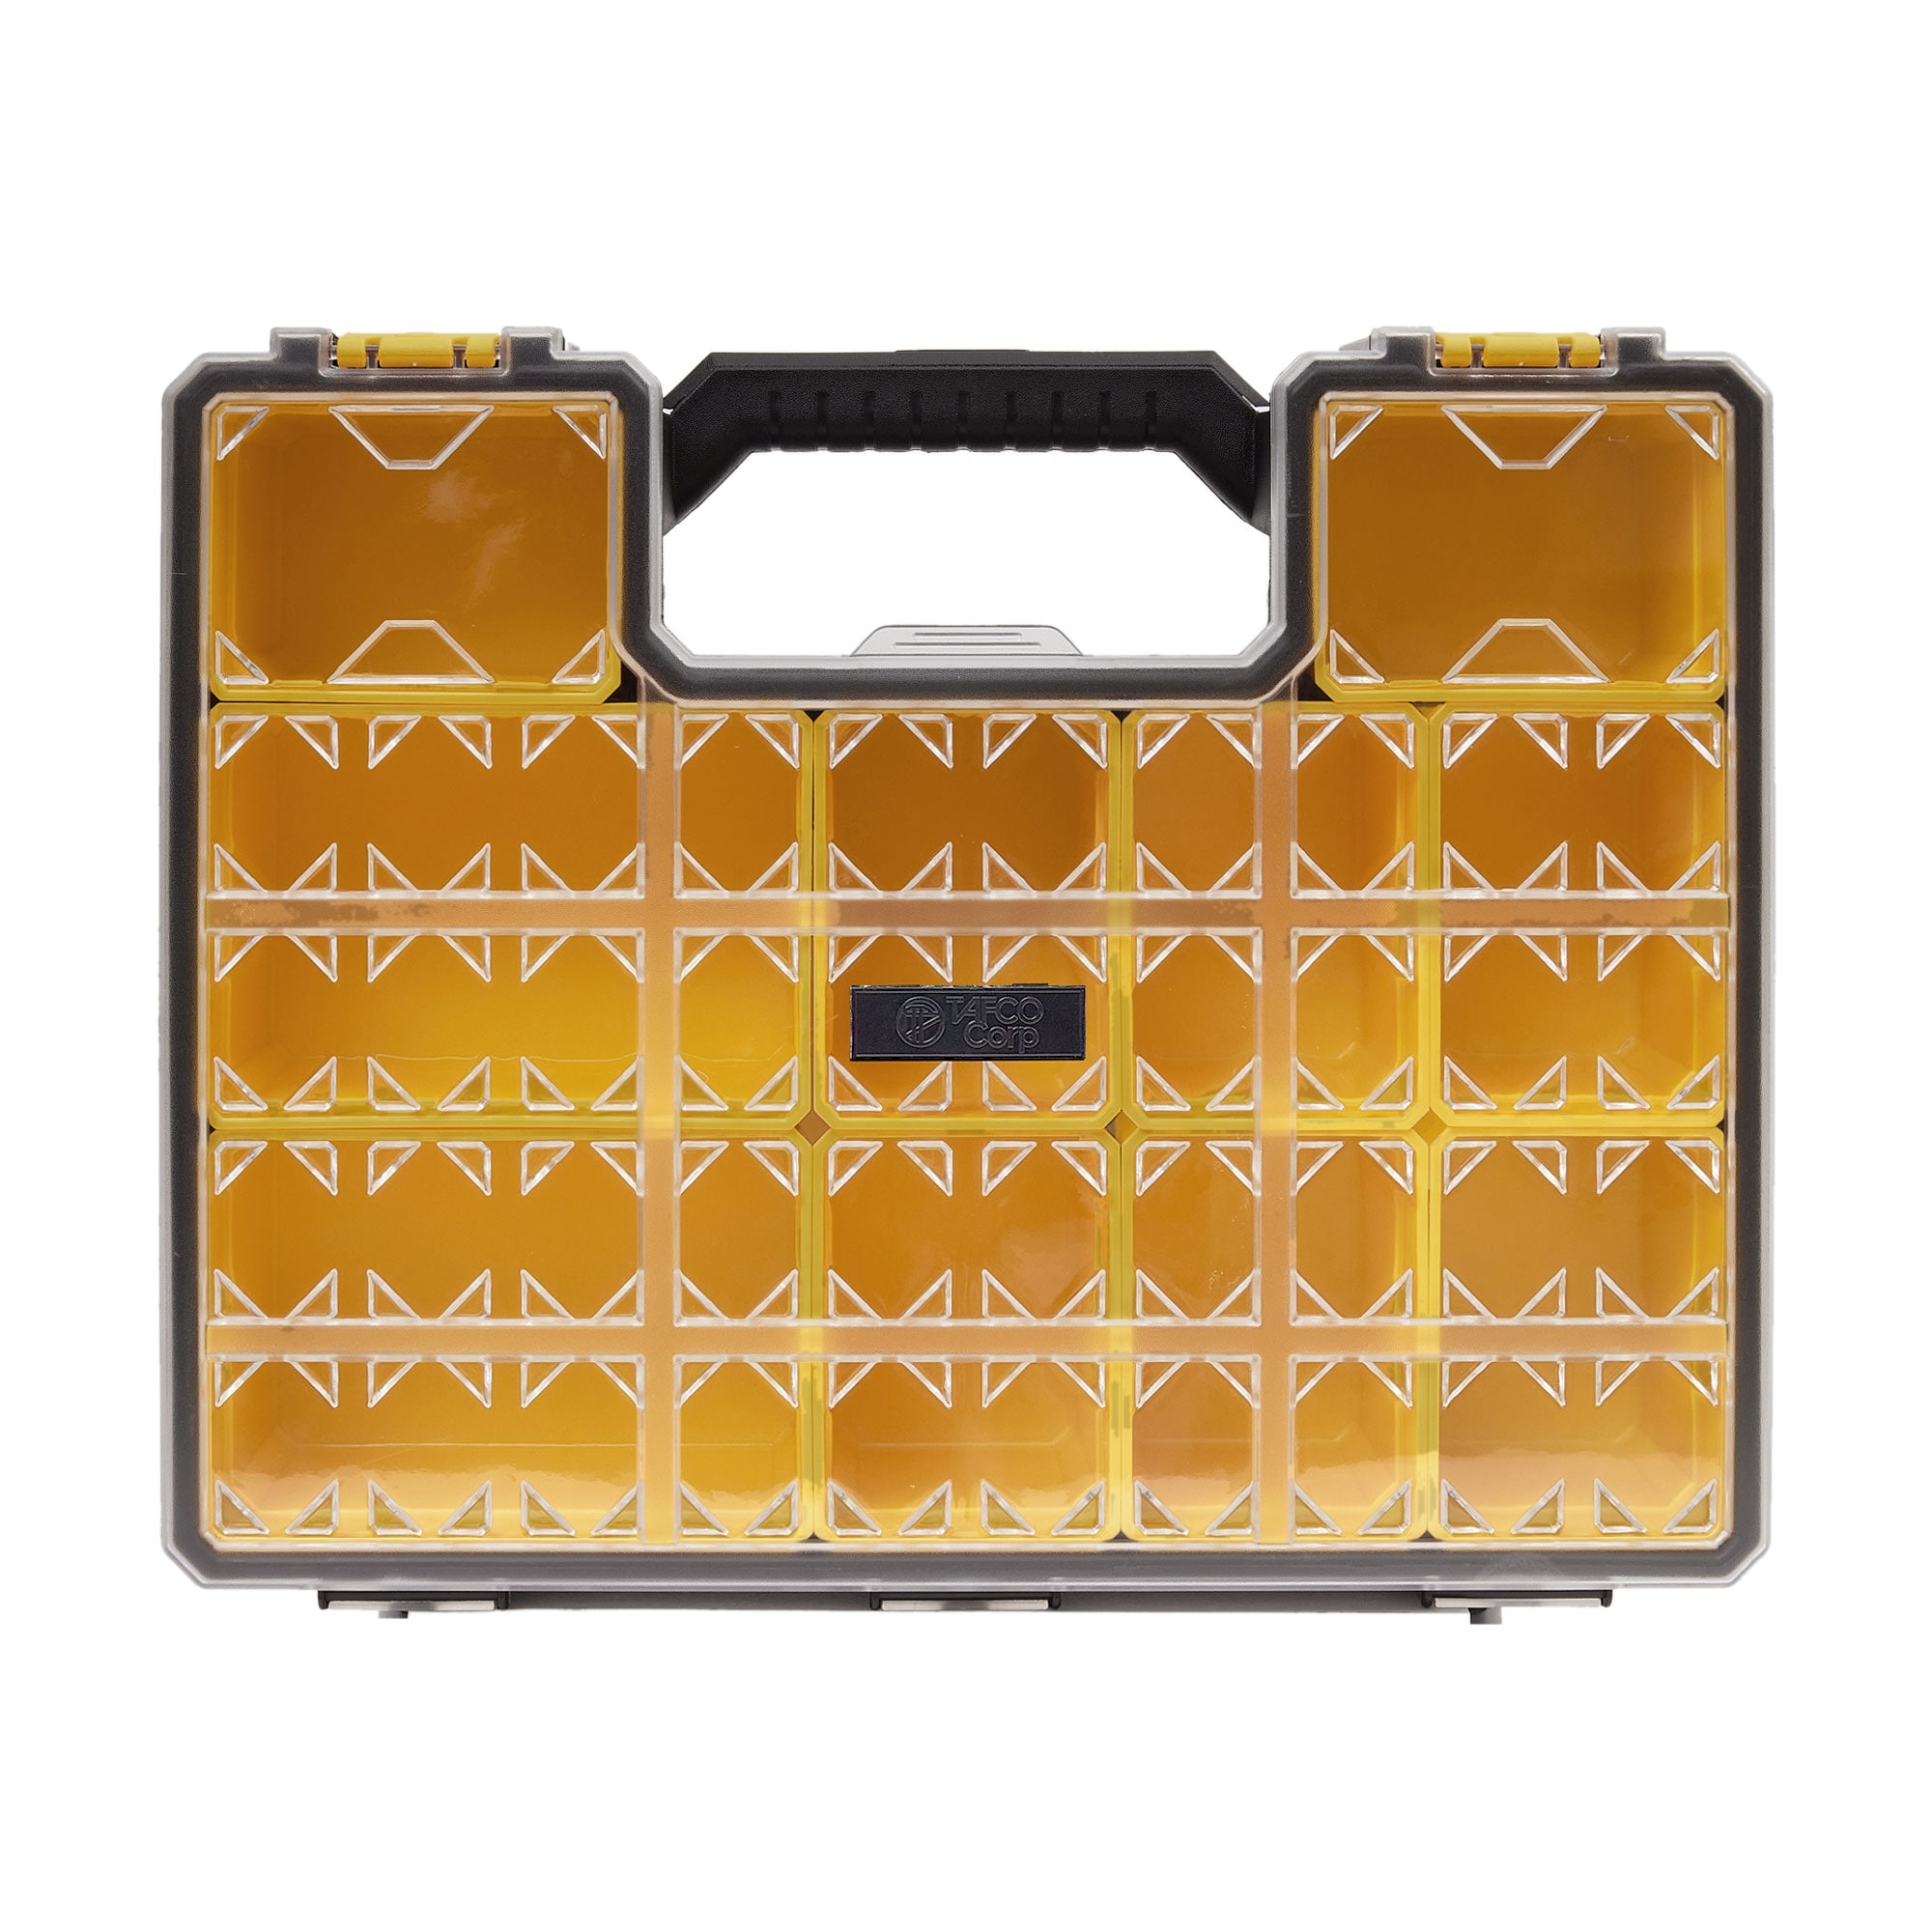 TAFCO 10 Compartment Pro-Go Deep Cup Small Parts Organizer, Yellow